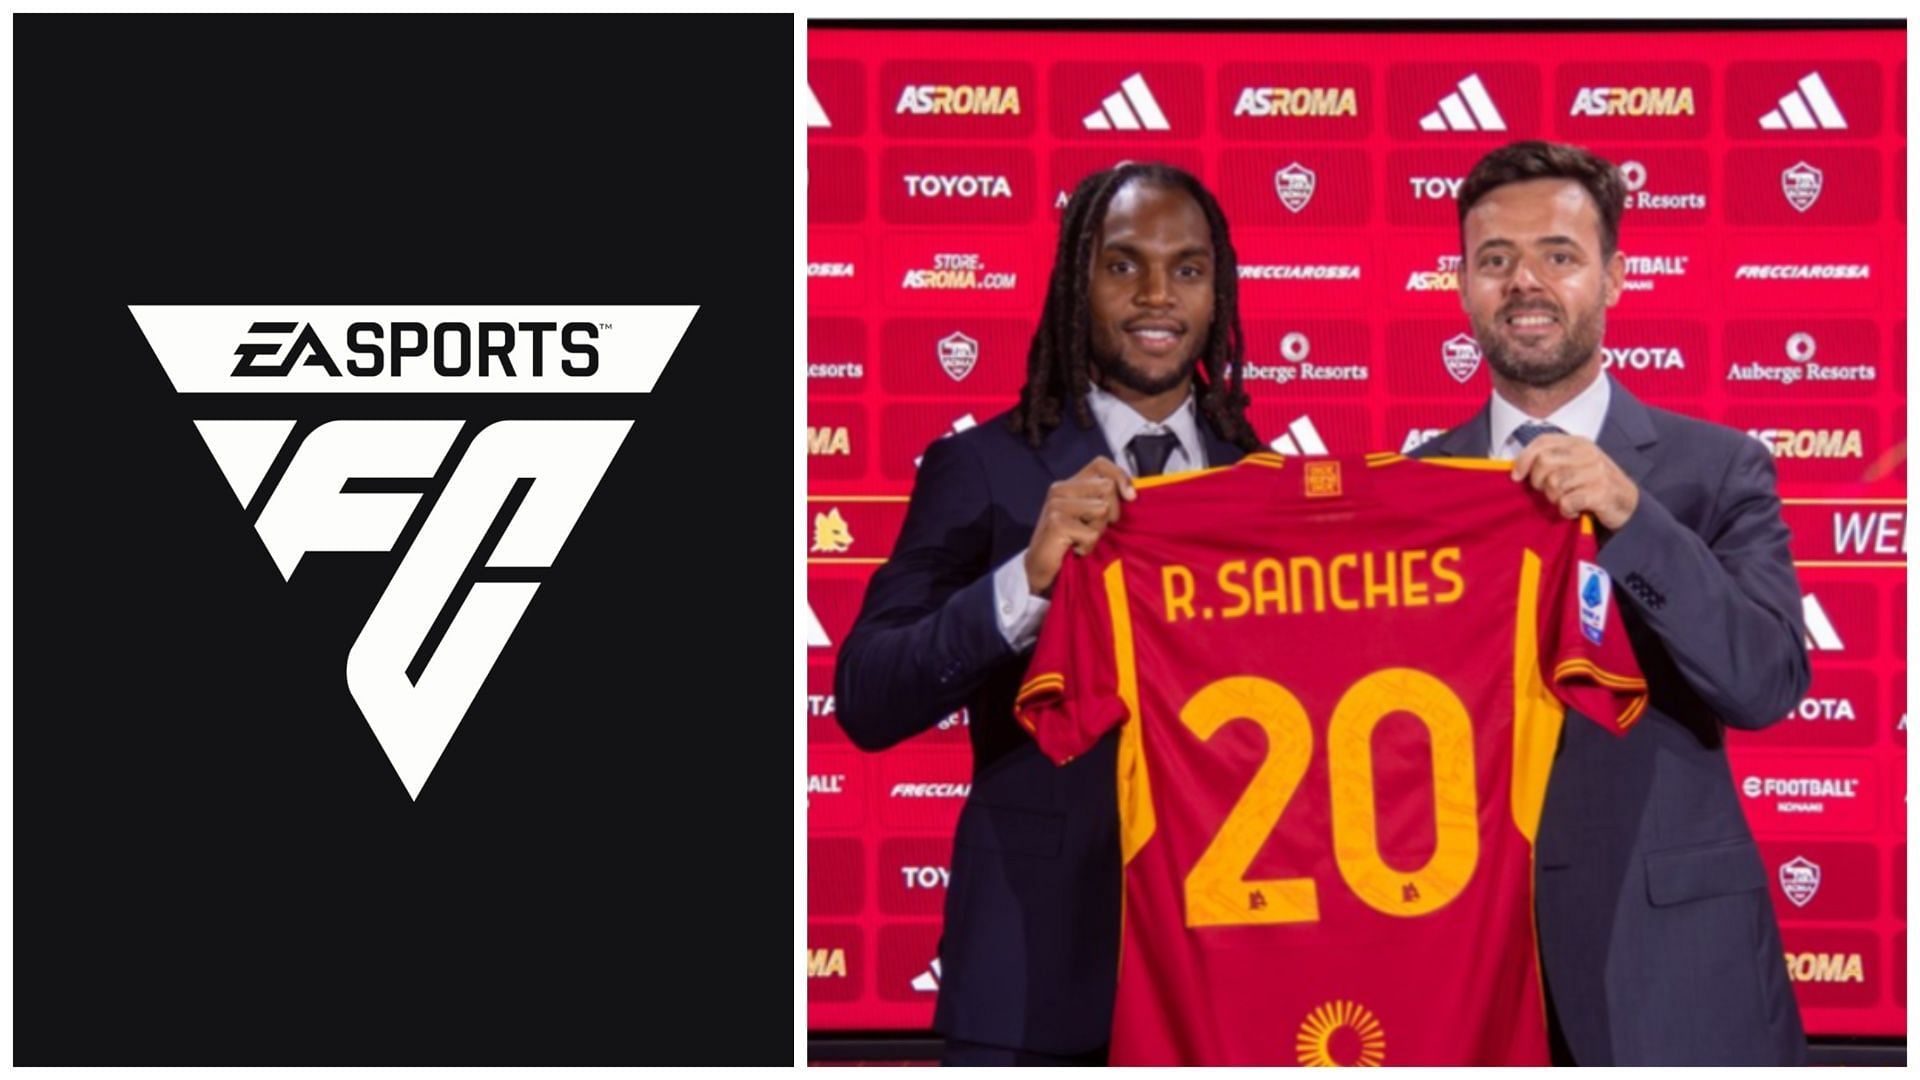 Renato Sanches is overpowered in EA FC (Images via EA Sports and AS Roma)